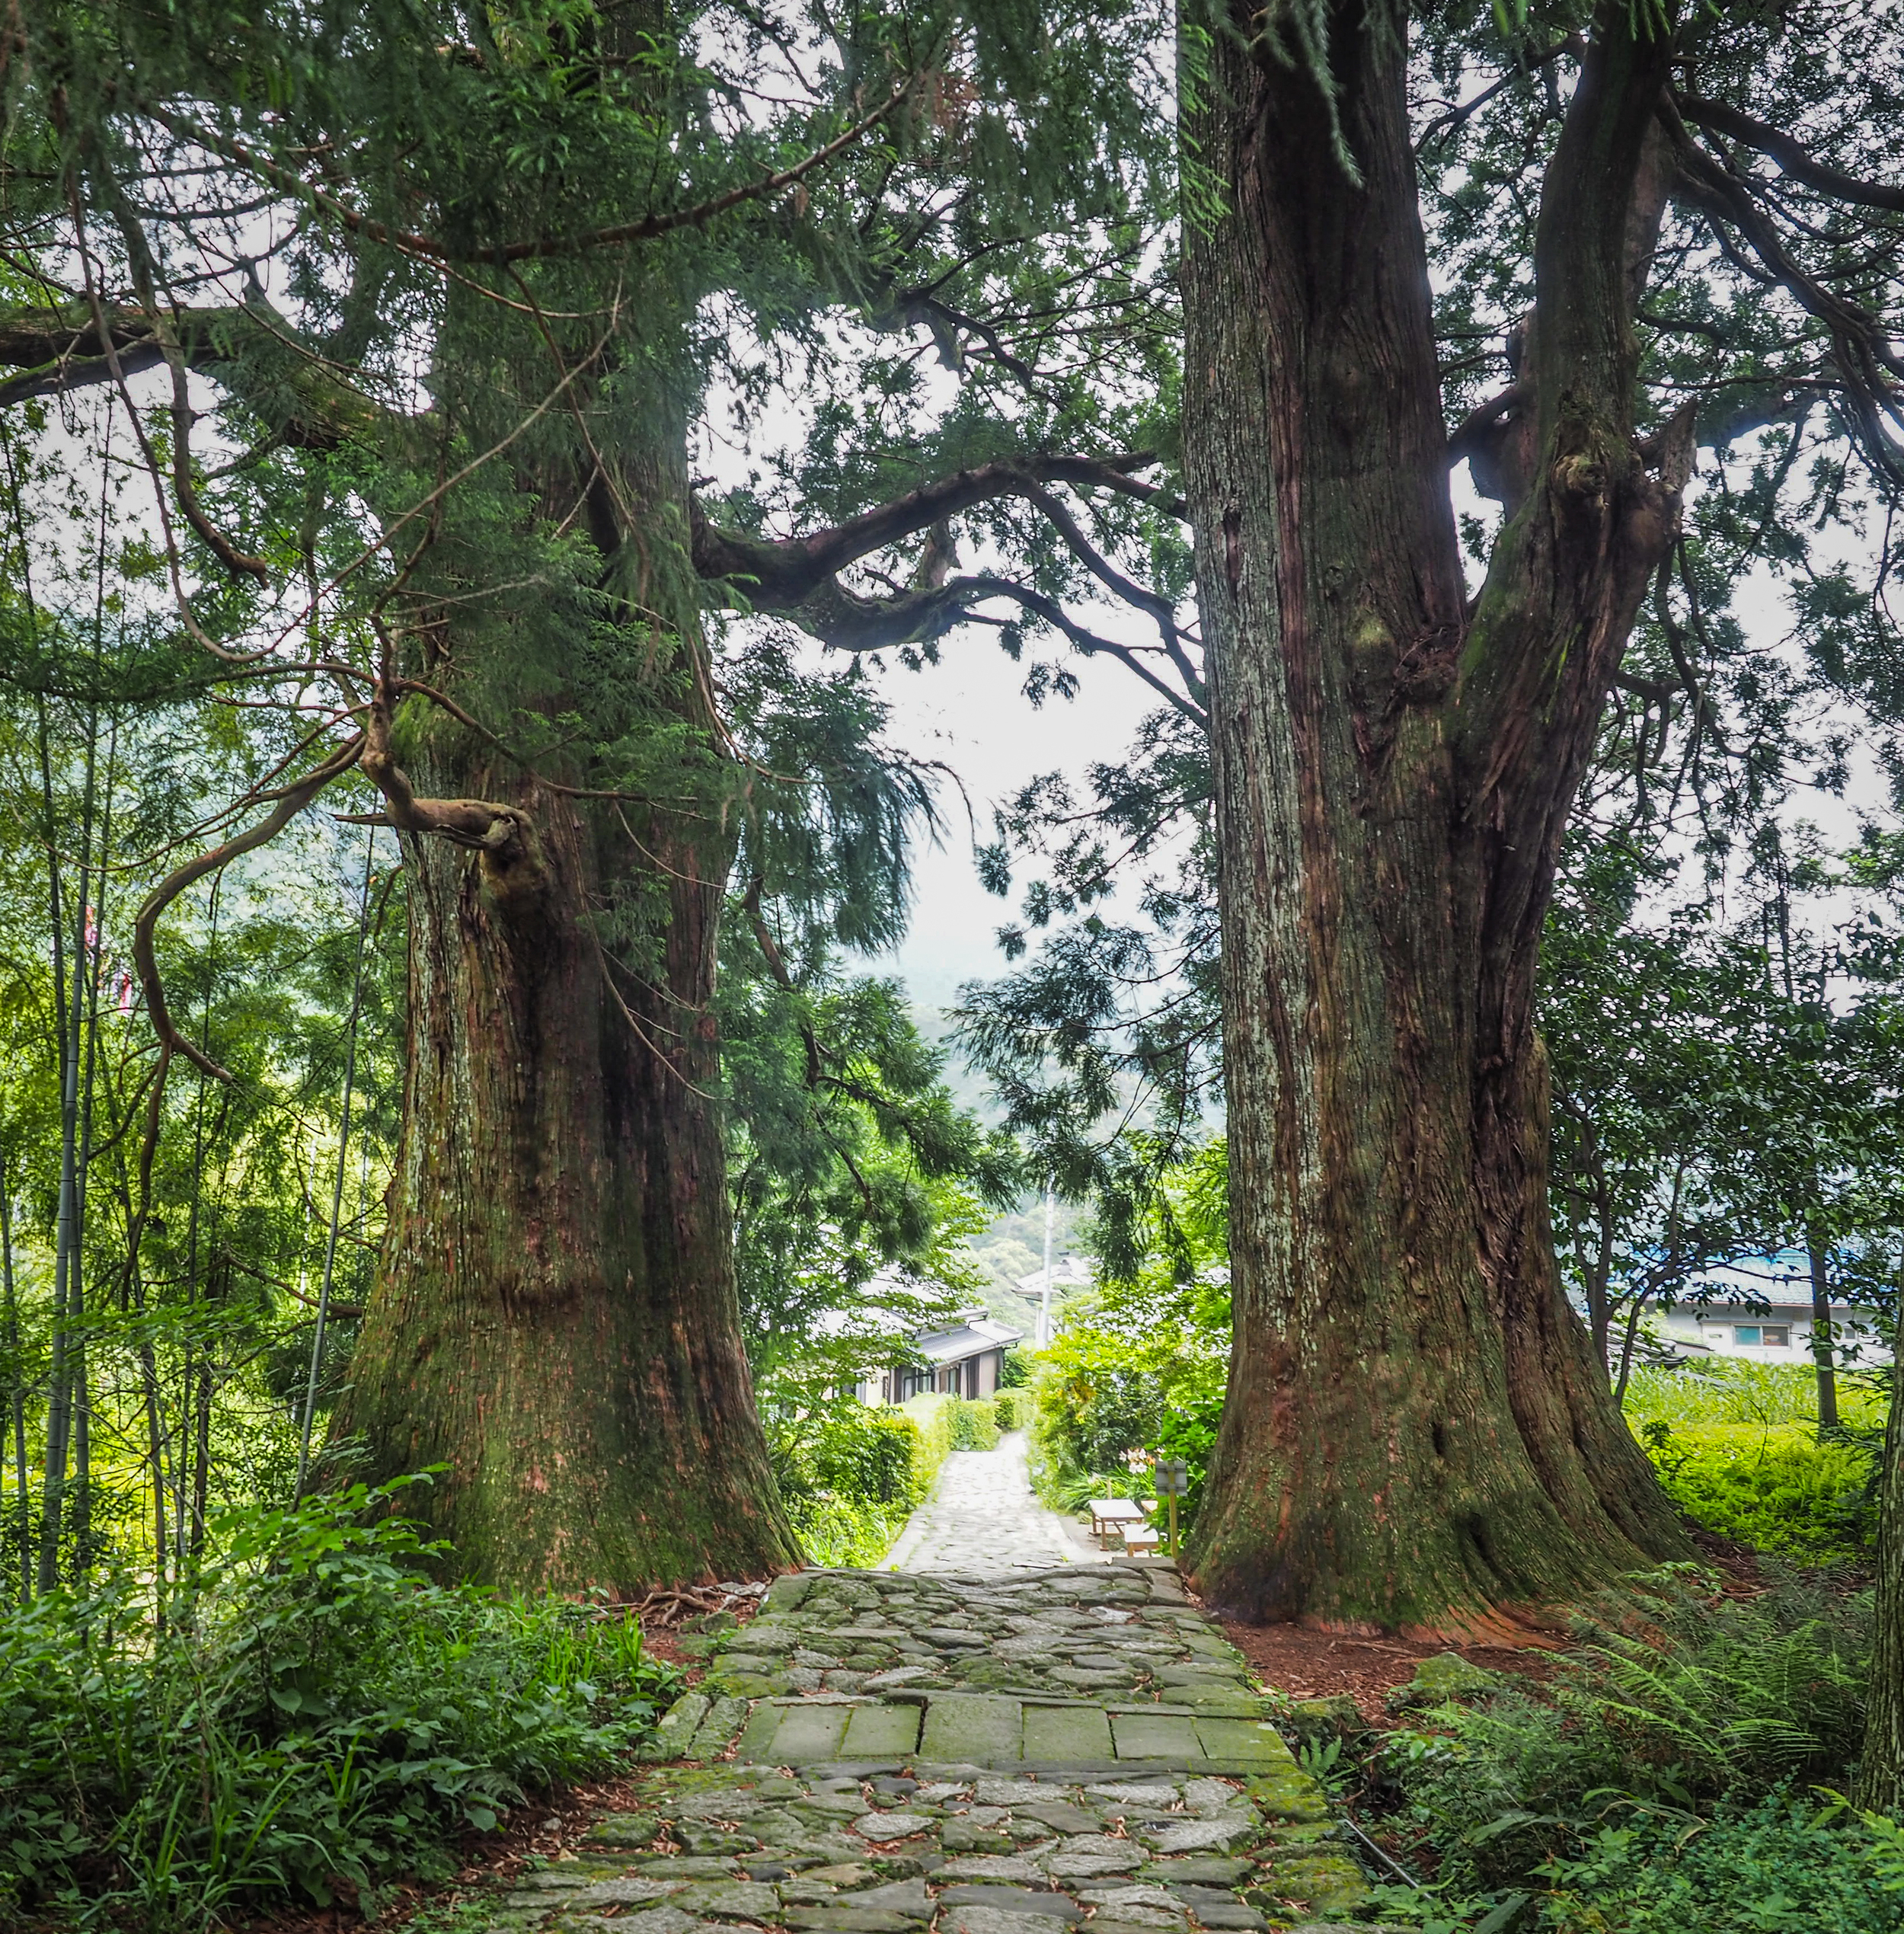 pair of 800 year old trees at the entrance to the Daimon-zaka slope